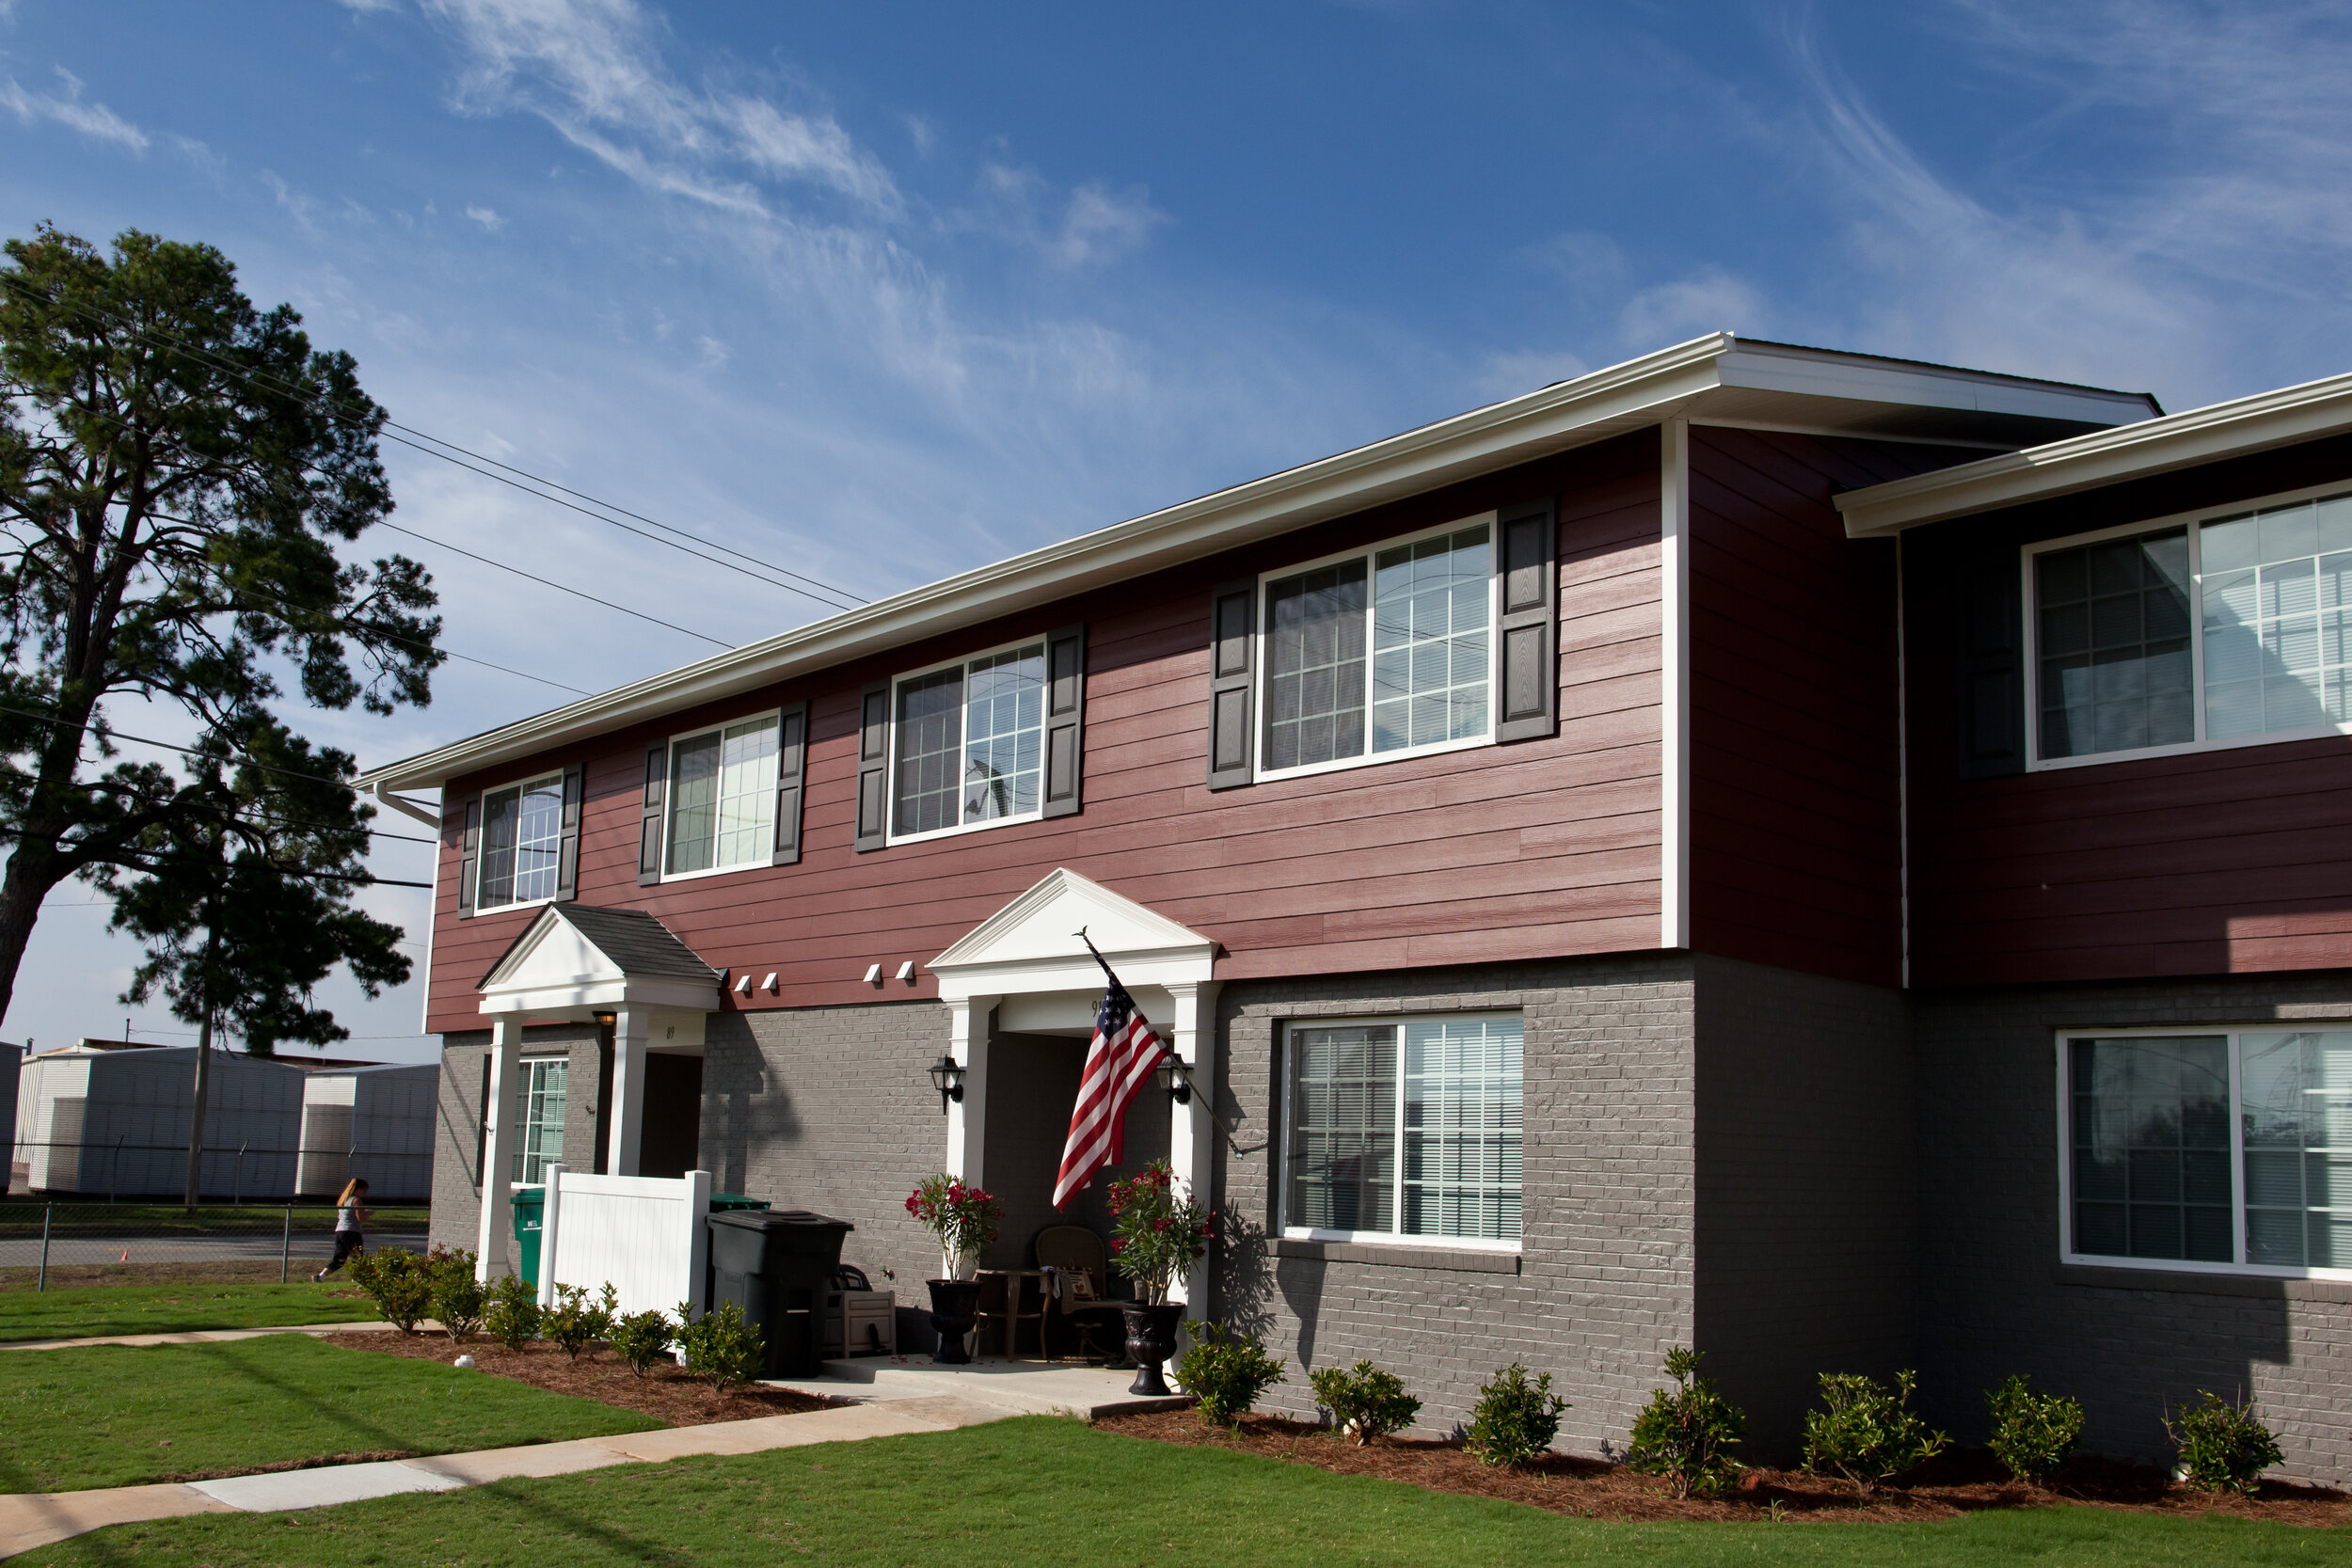  The Villages at Fort Moore offers 2-, 3-, 4-, and 5-bedroom homes for servicemembers and their families. 